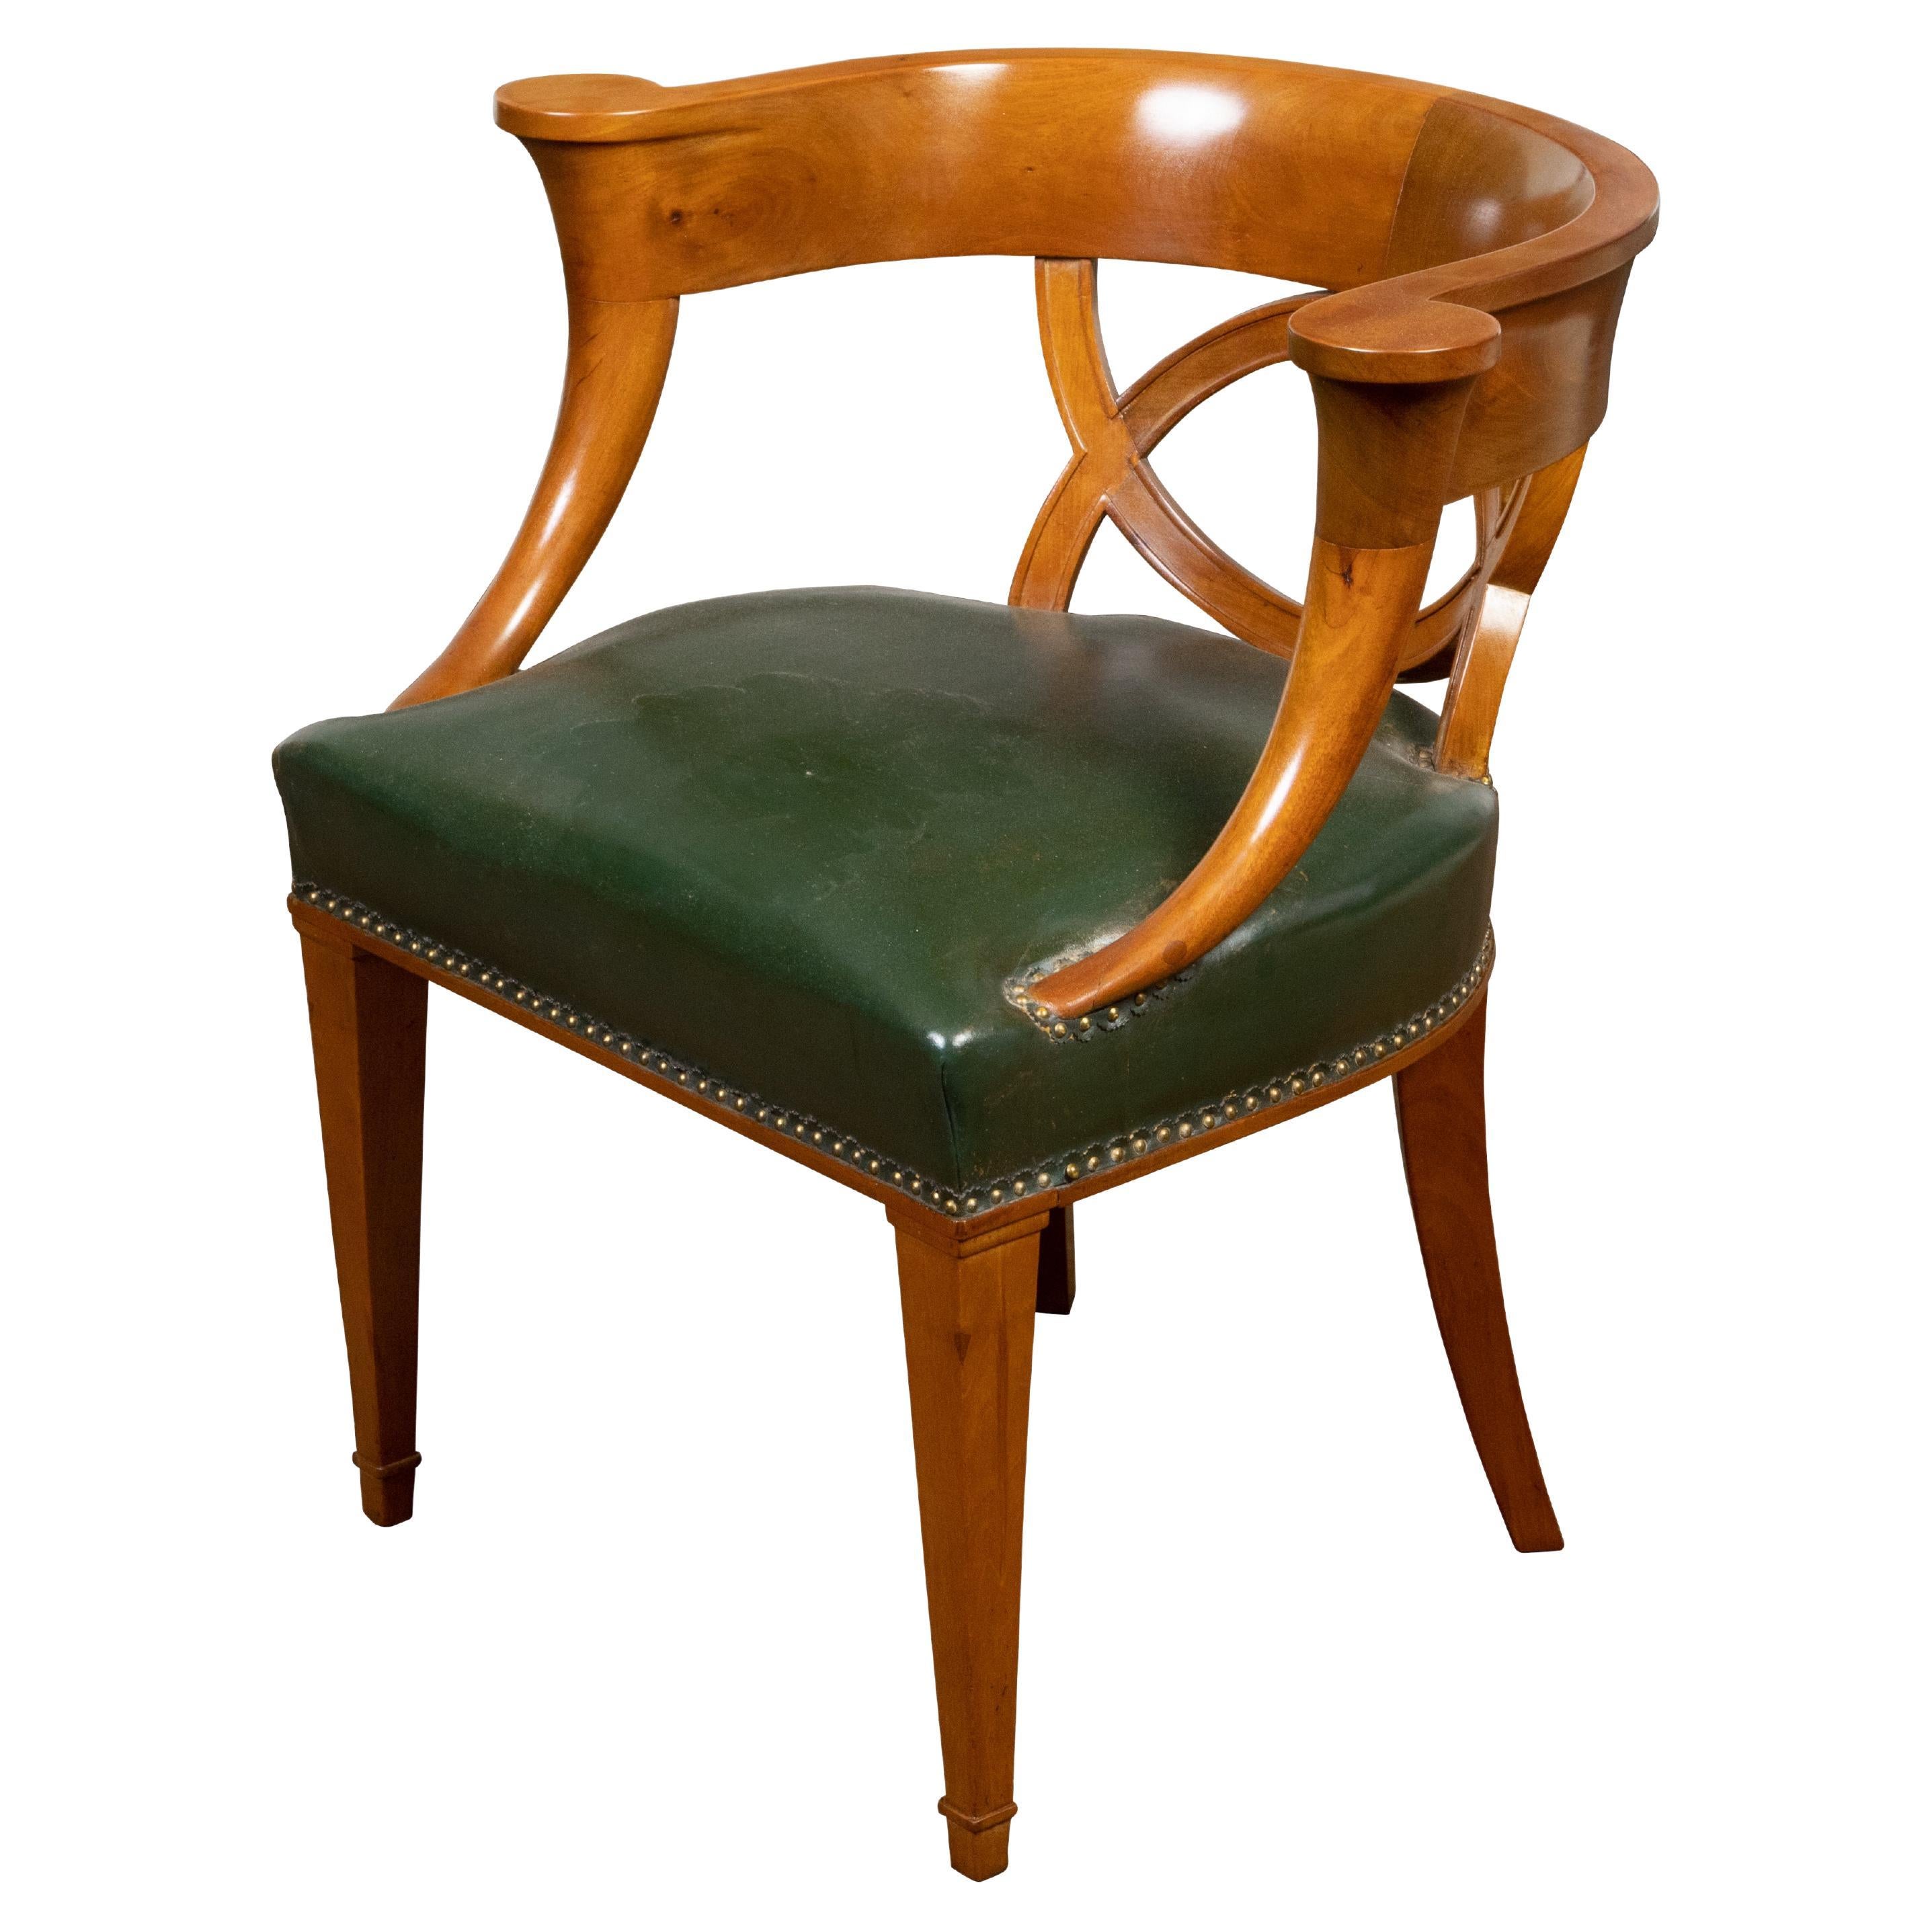 Biedermeier Period 19th Century Horseshoe Back Armchair with Green Upholstery